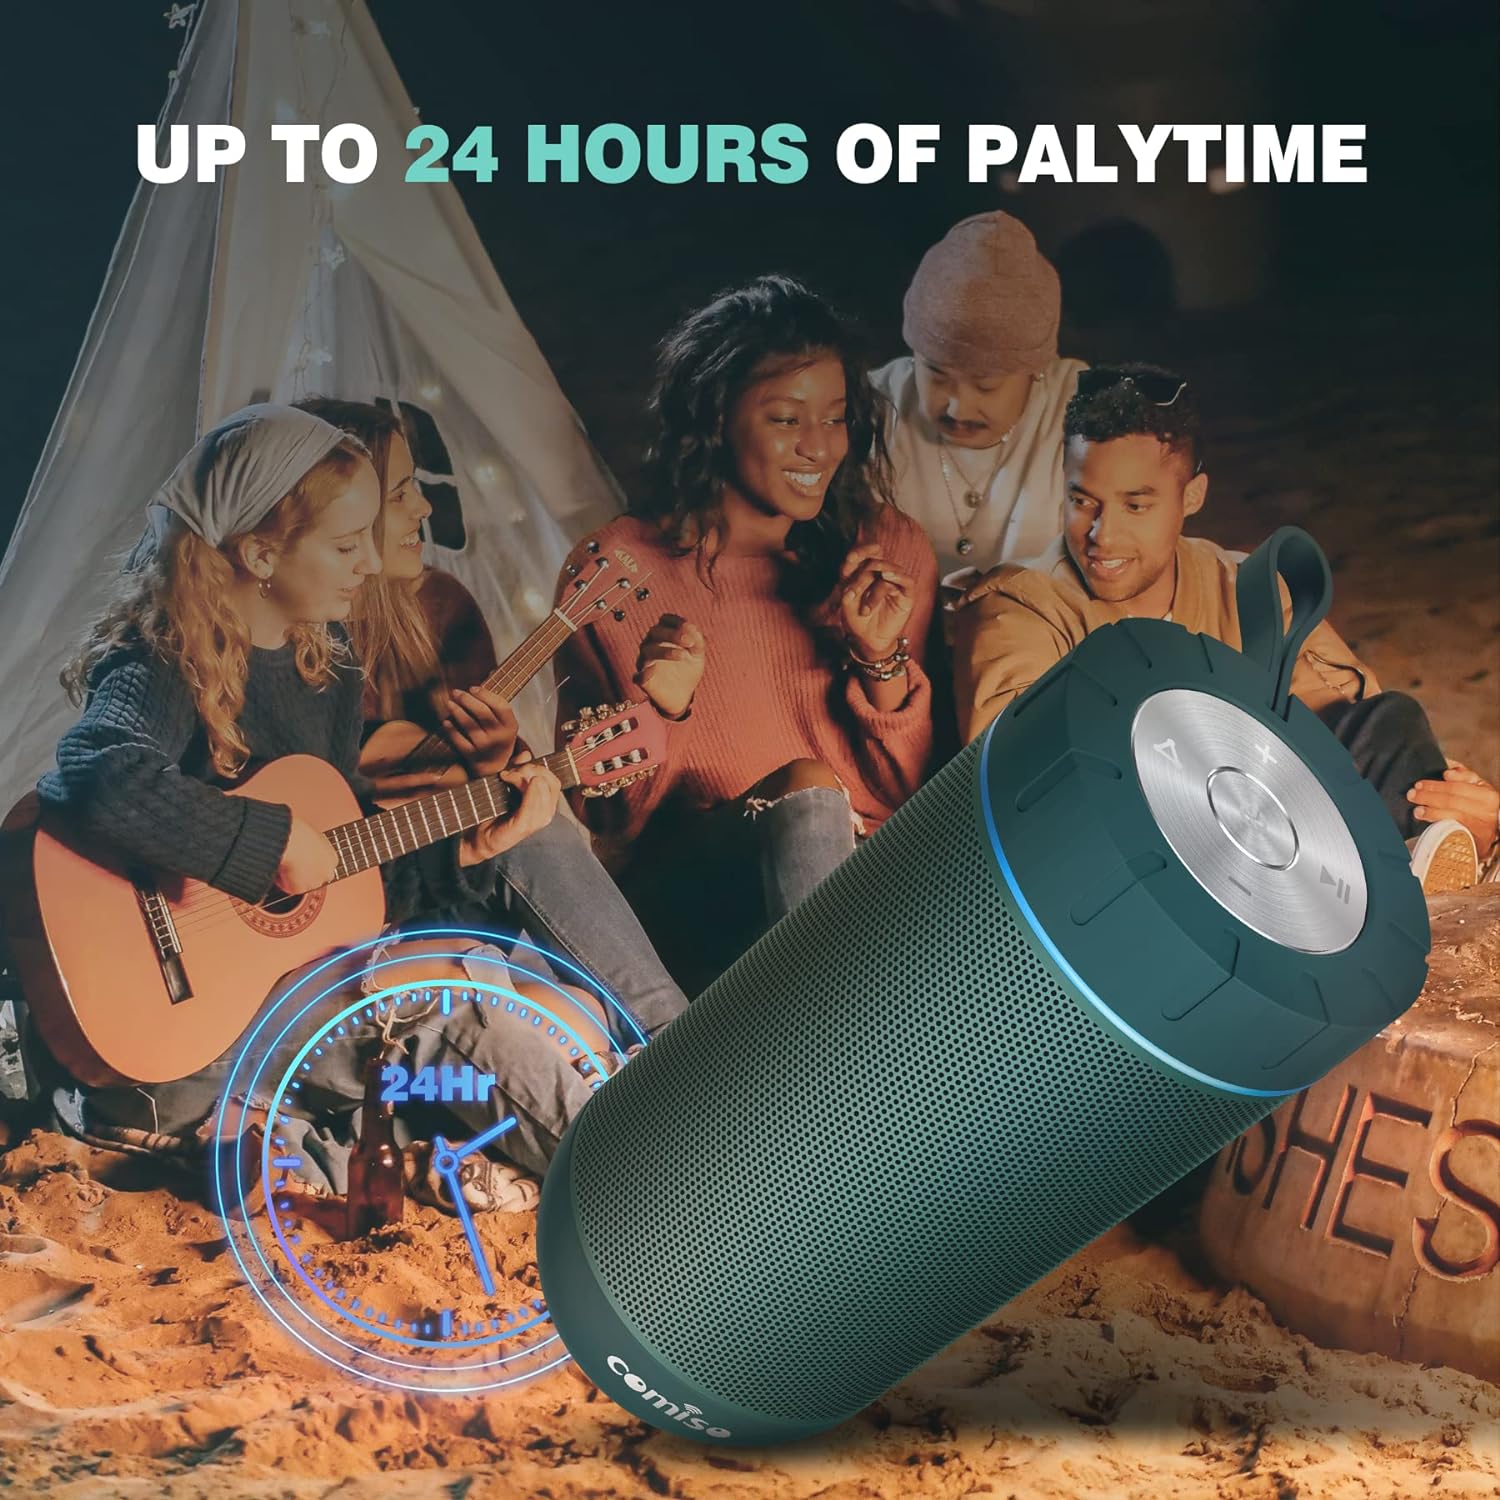 COMISO Waterproof Bluetooth Speakers Outdoor Wireless Portable Speaker with 24 Hours Playtime Superior Sound for Camping, Beach, Sports, Pool Party, Shower (Teal)